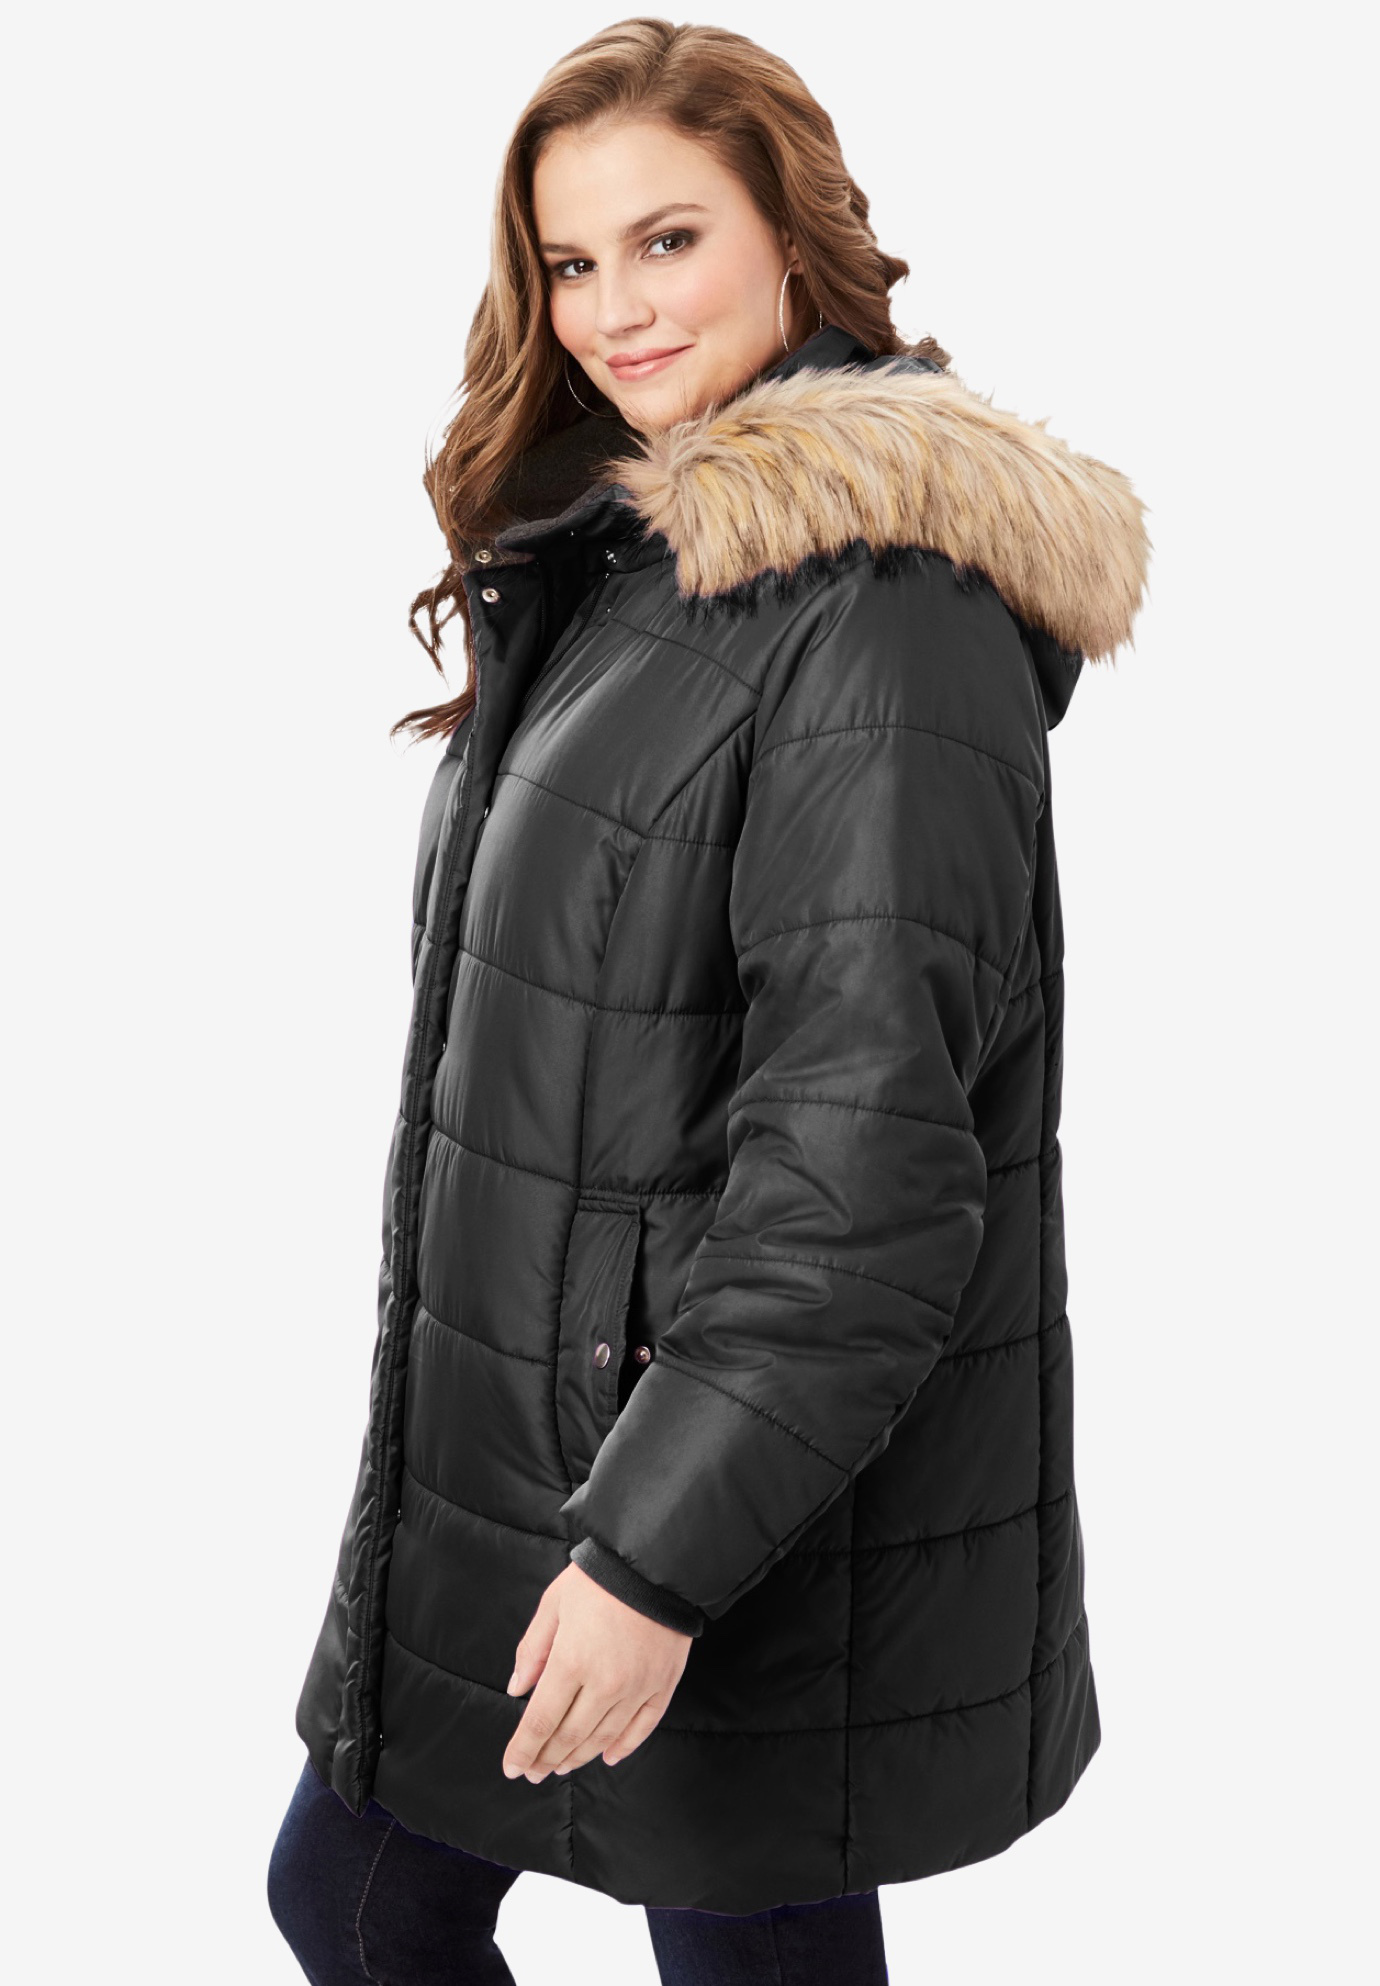 Roaman's Women's Plus Size Classic-Length Quilted Puffer Jacket Winter Coat - image 3 of 6